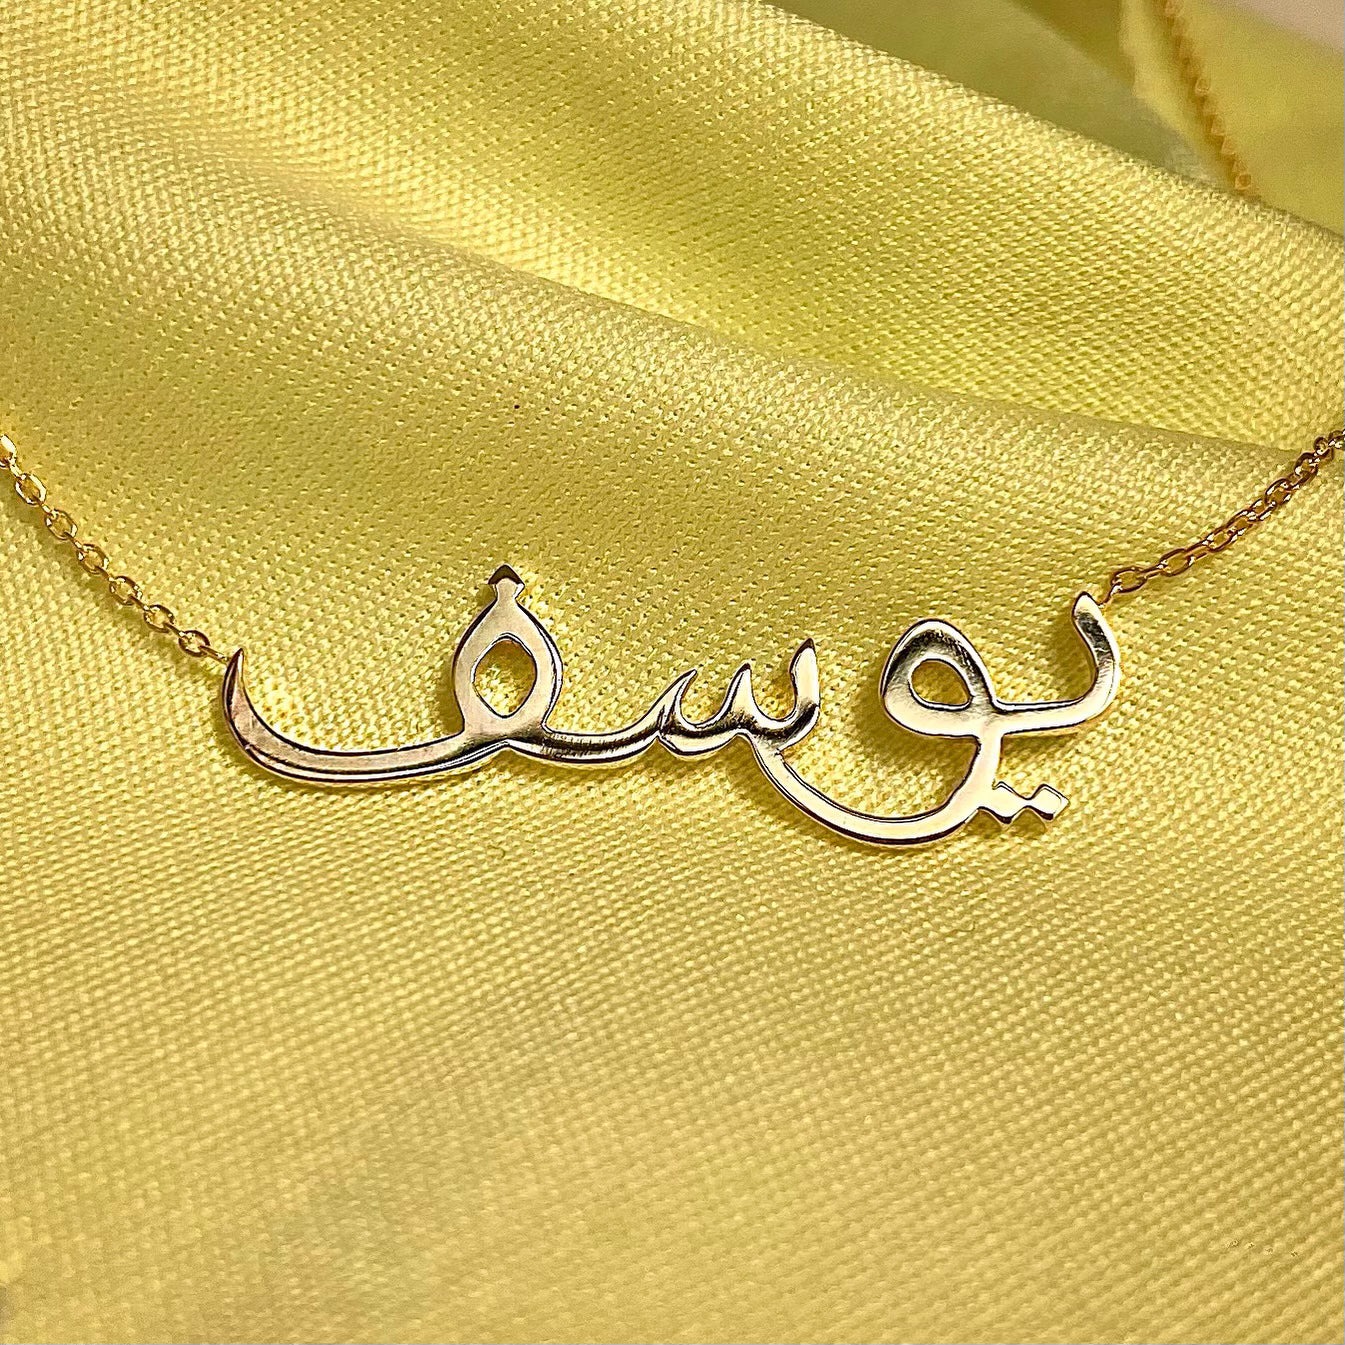 Gilded Stories: The Beauty of Arabic Name Necklaces in Gold